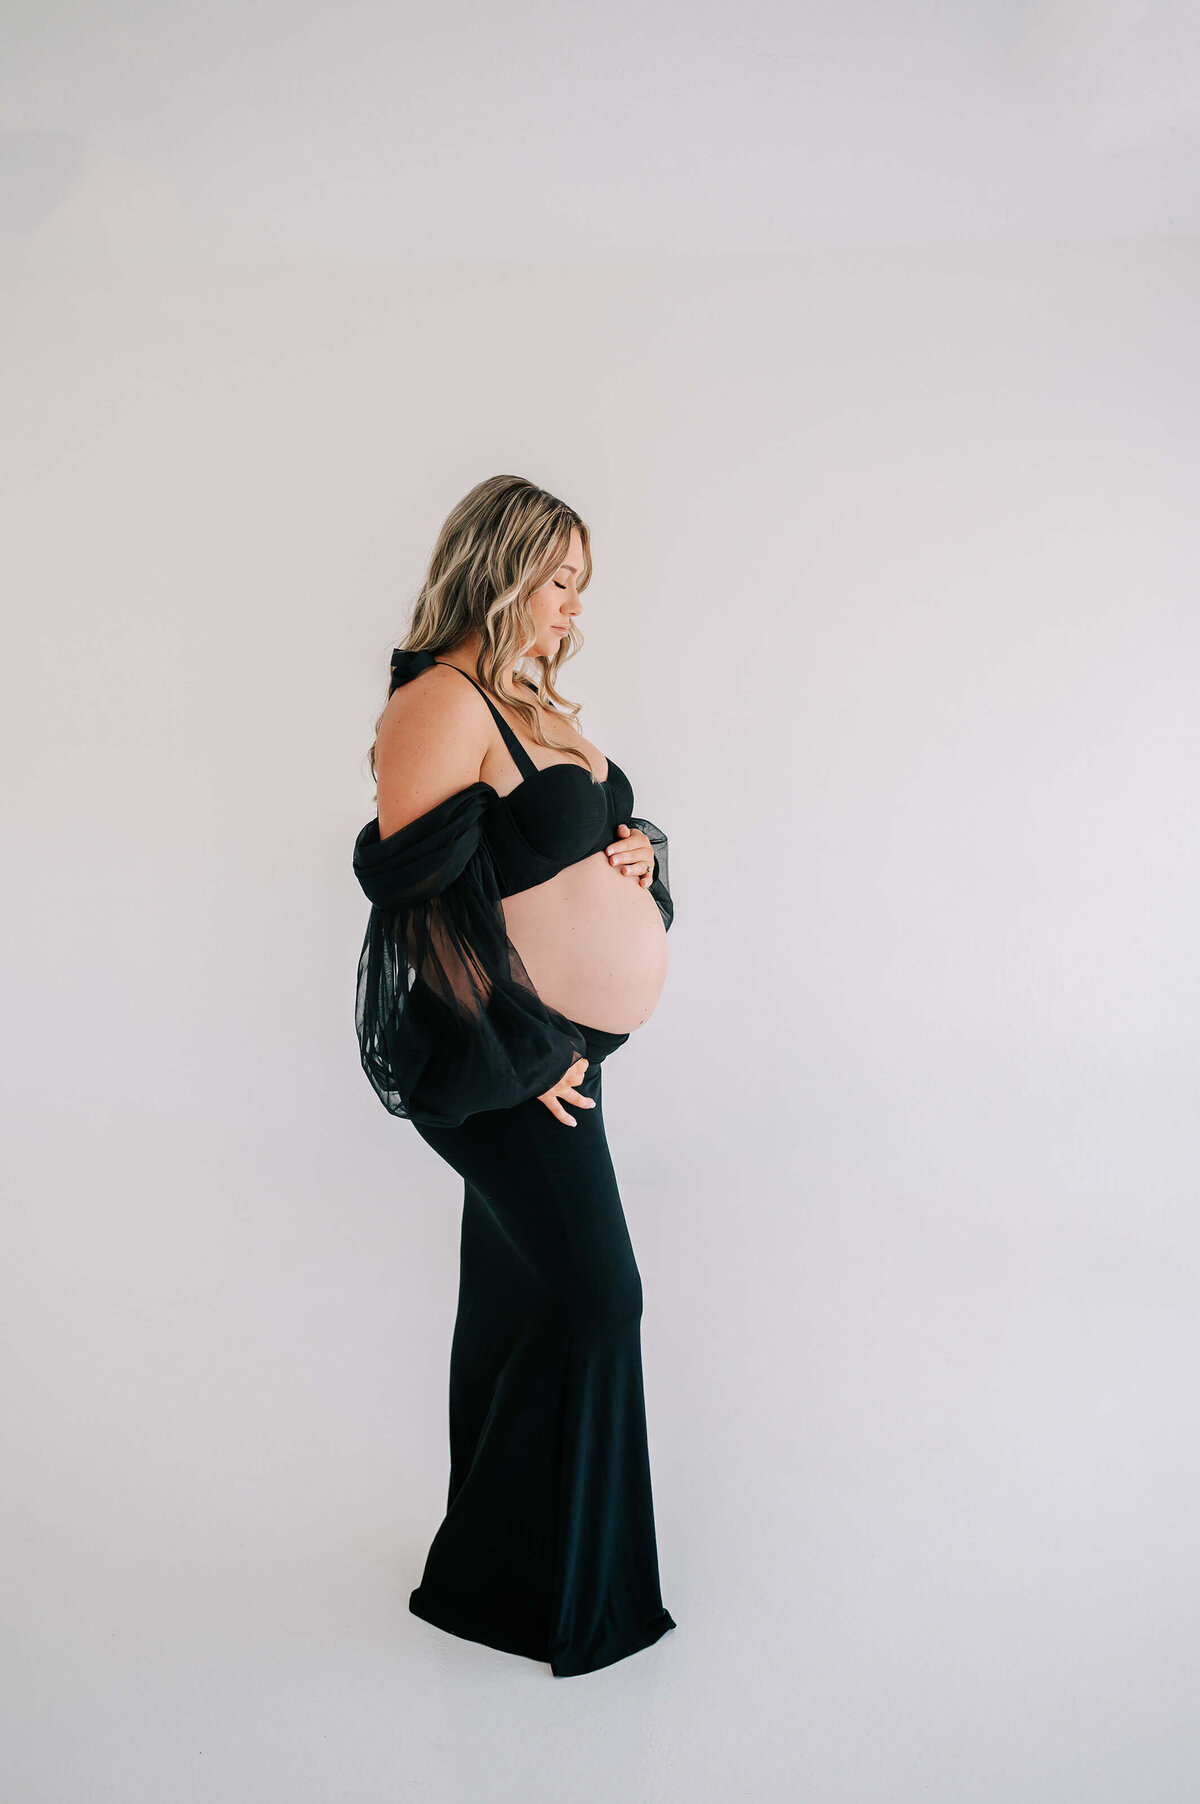 Springfield MO maternity photographer Jessica Kennedy of The XO Photogrpahy captures pregnant mom holding baby bump